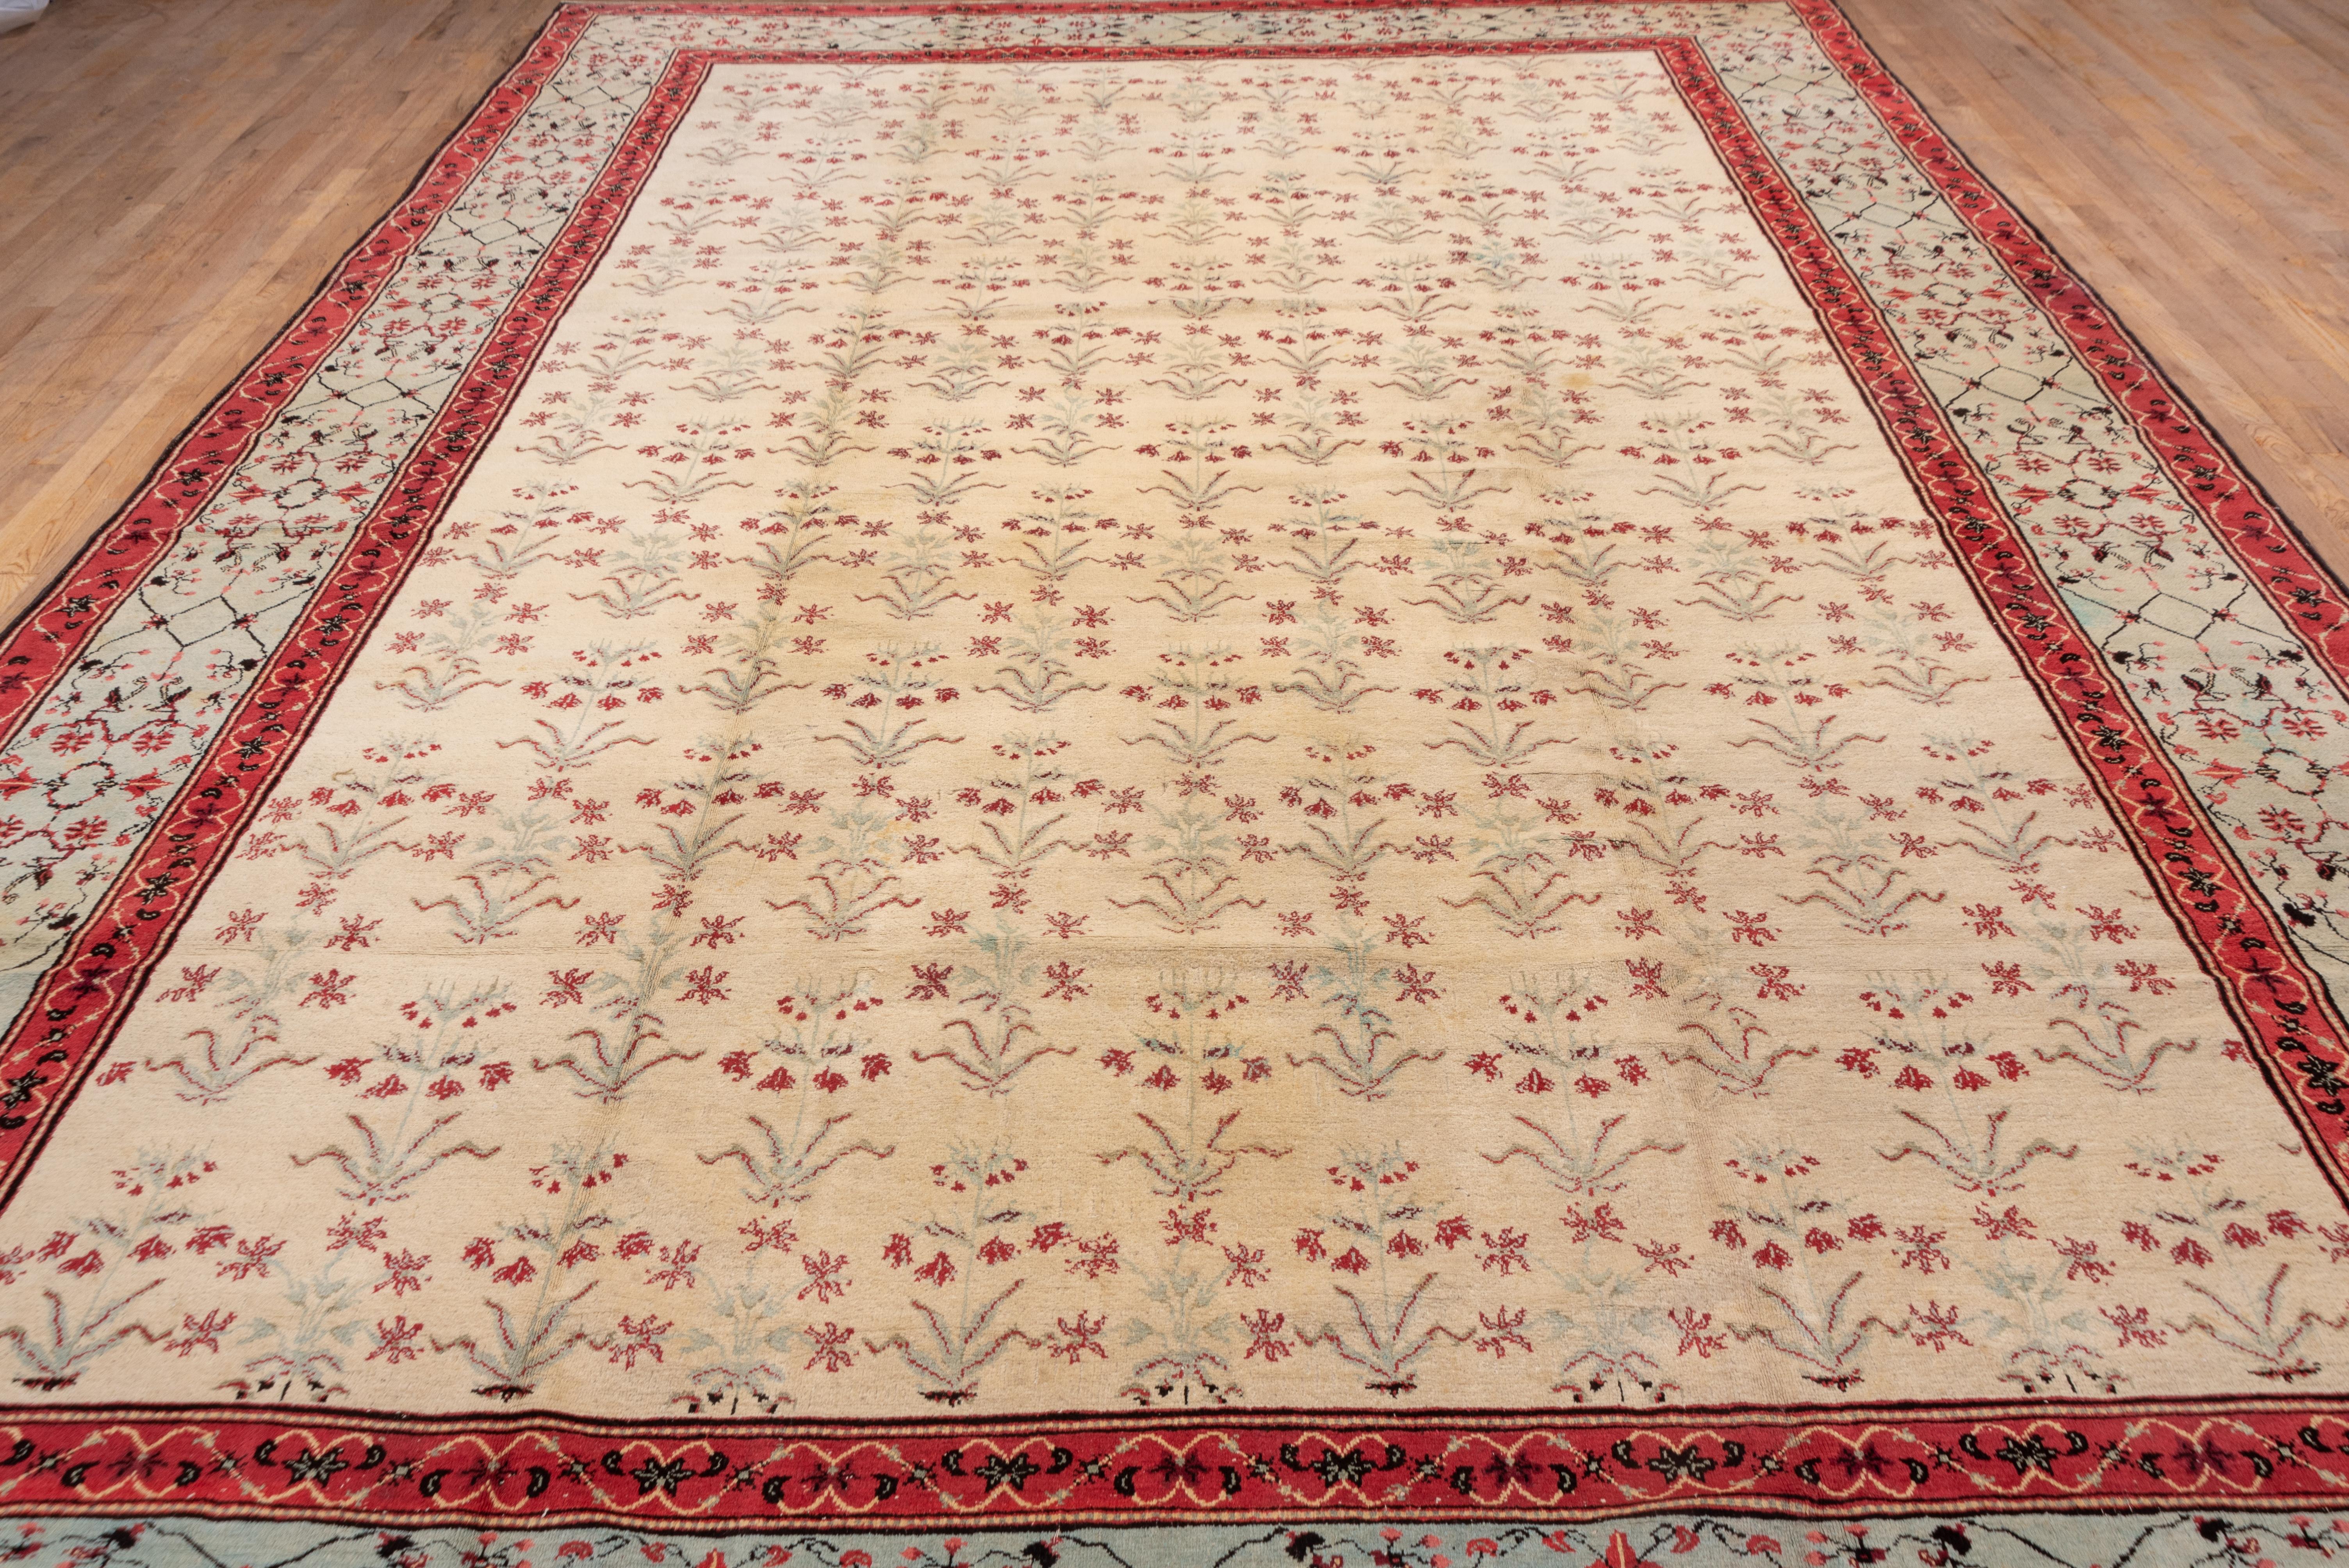 Antique Indian Agra Carpet, Ivory Field For Sale 1